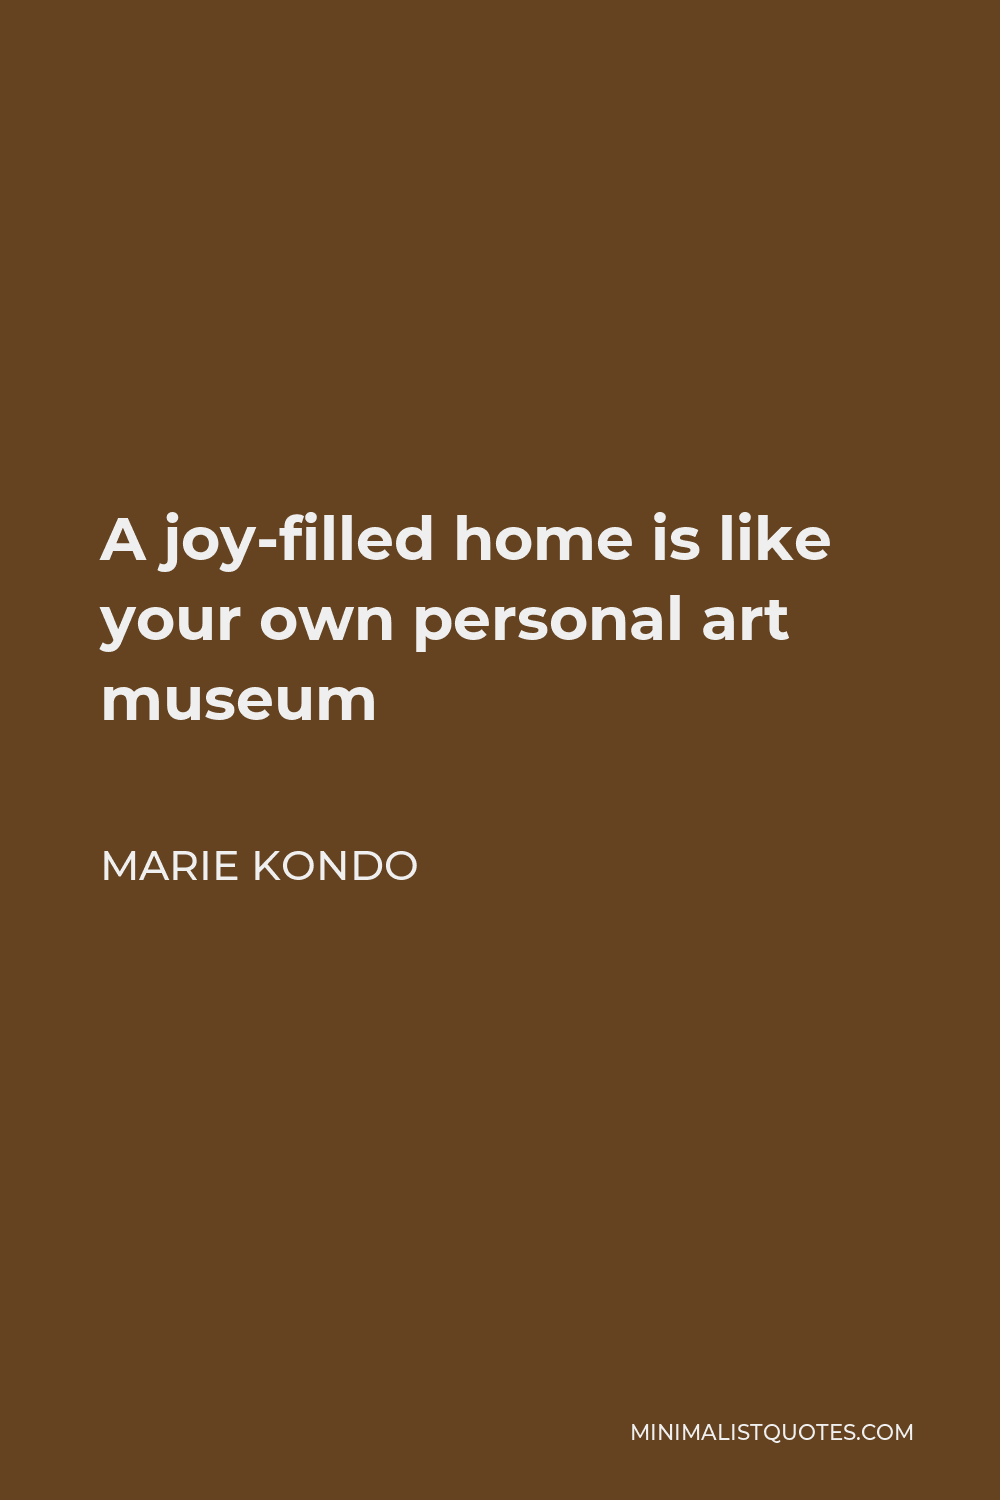 Marie Kondo Quote - A joy-filled home is like your own personal art museum